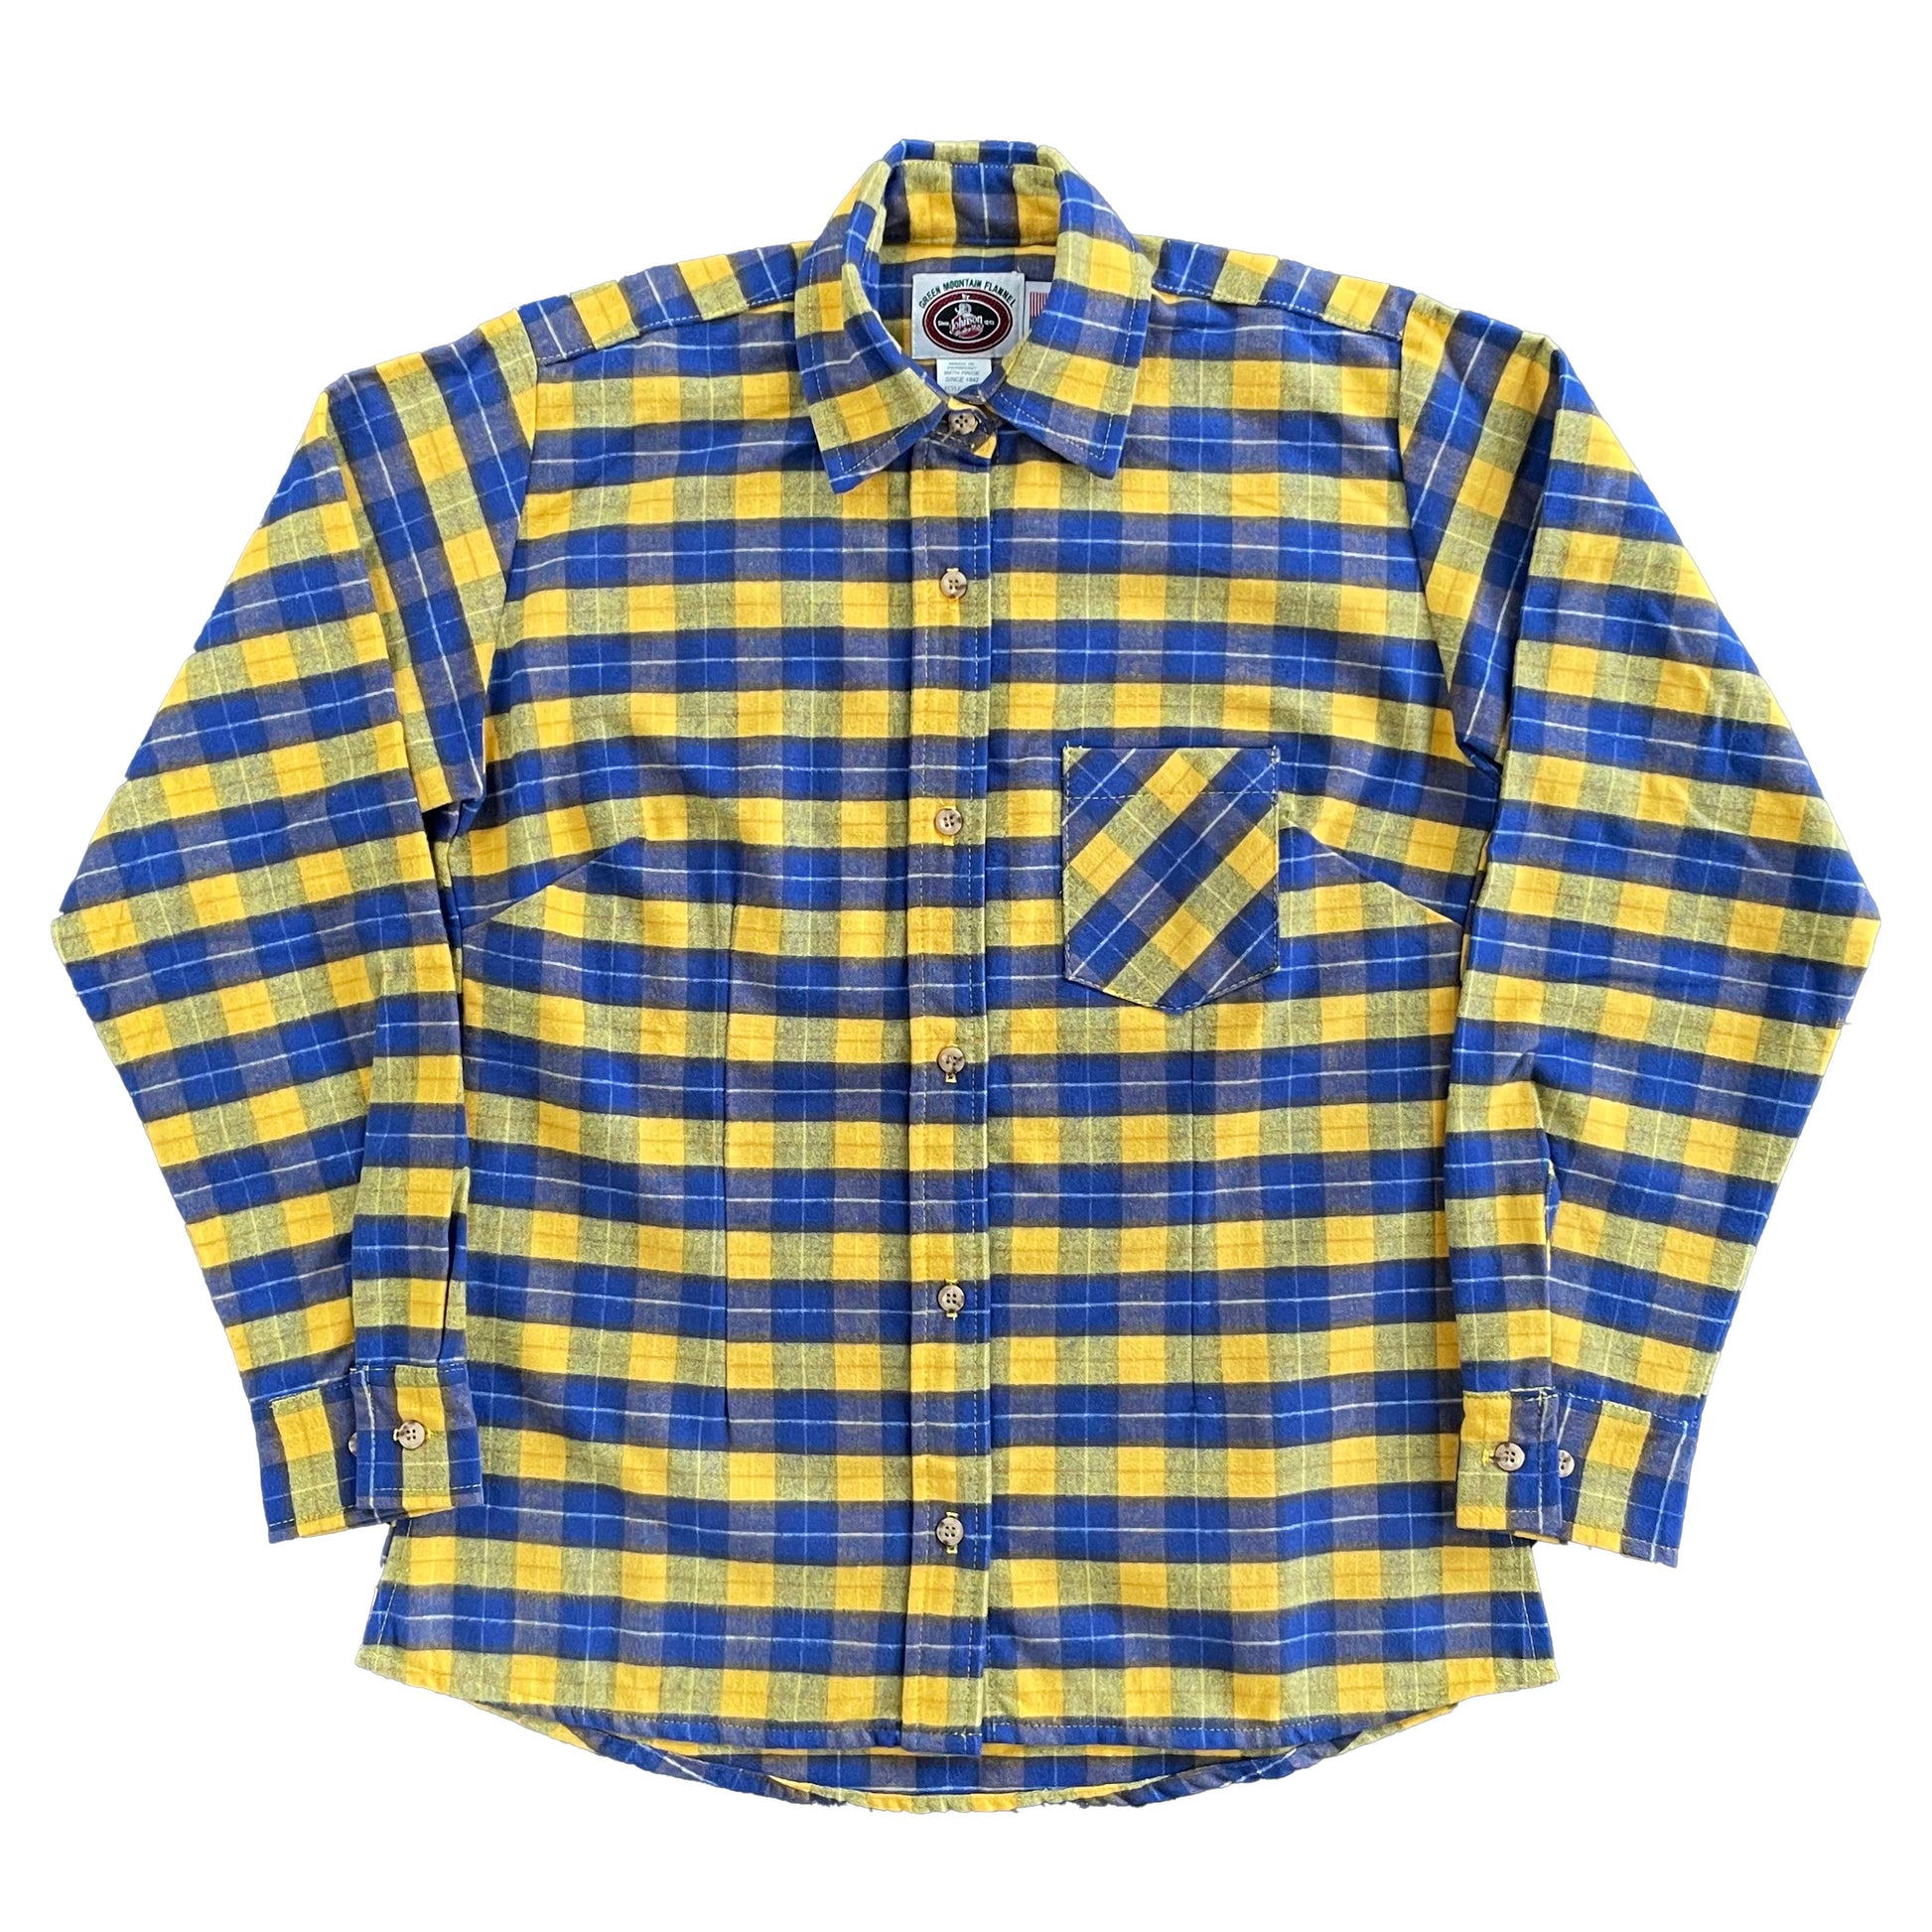 Women's flannel yellow and blue plaid button down shirt